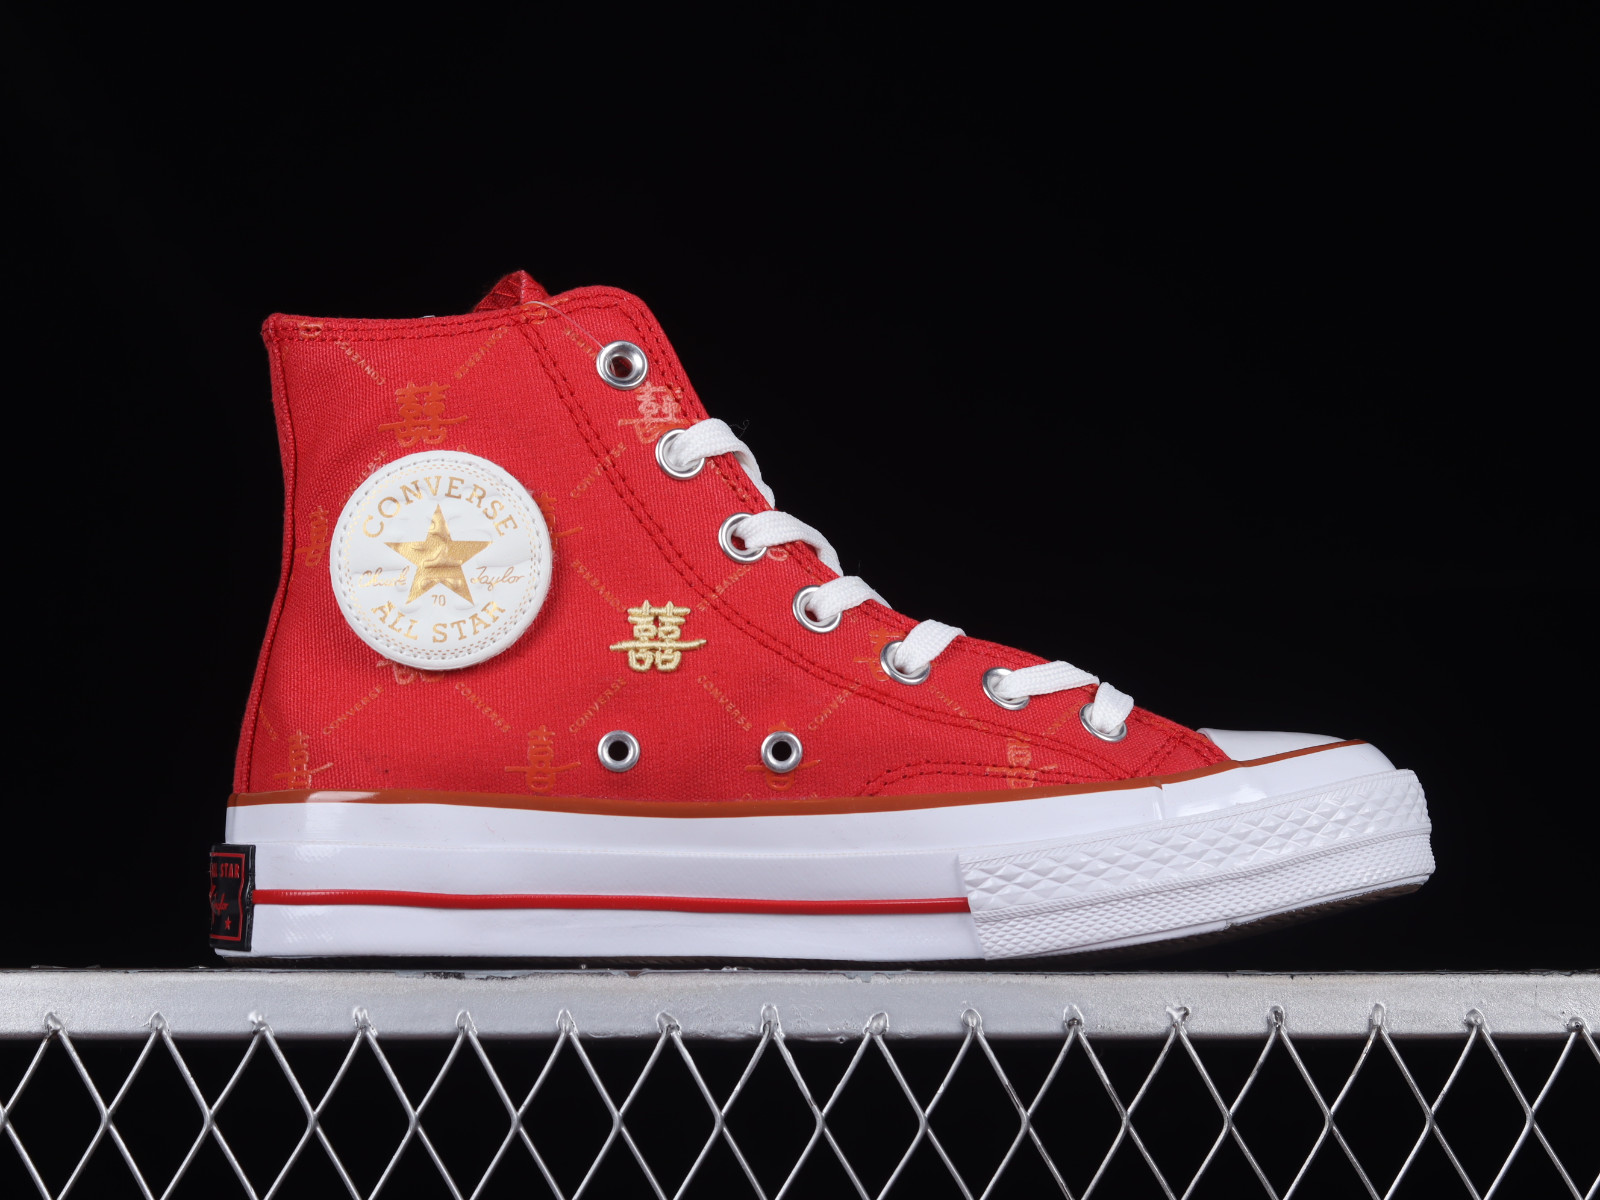 Converse Chuck Taylor All Star 70s Hi Gold White A05275C - MultiscaleconsultingShops